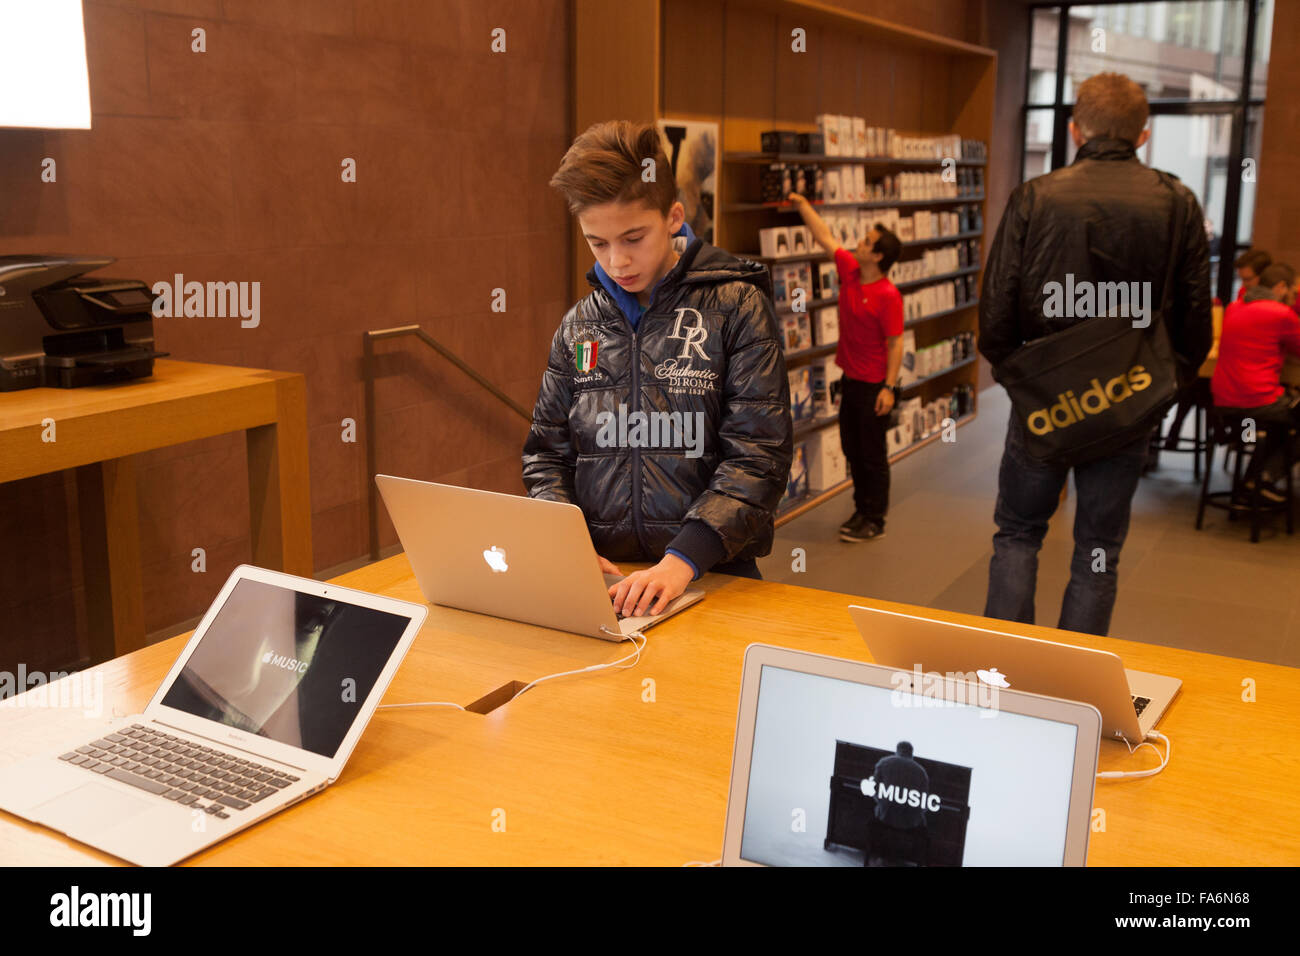 A teenager using an apple macbook laptop computer in the Apple store, Strasbourg, France Europe Stock Photo